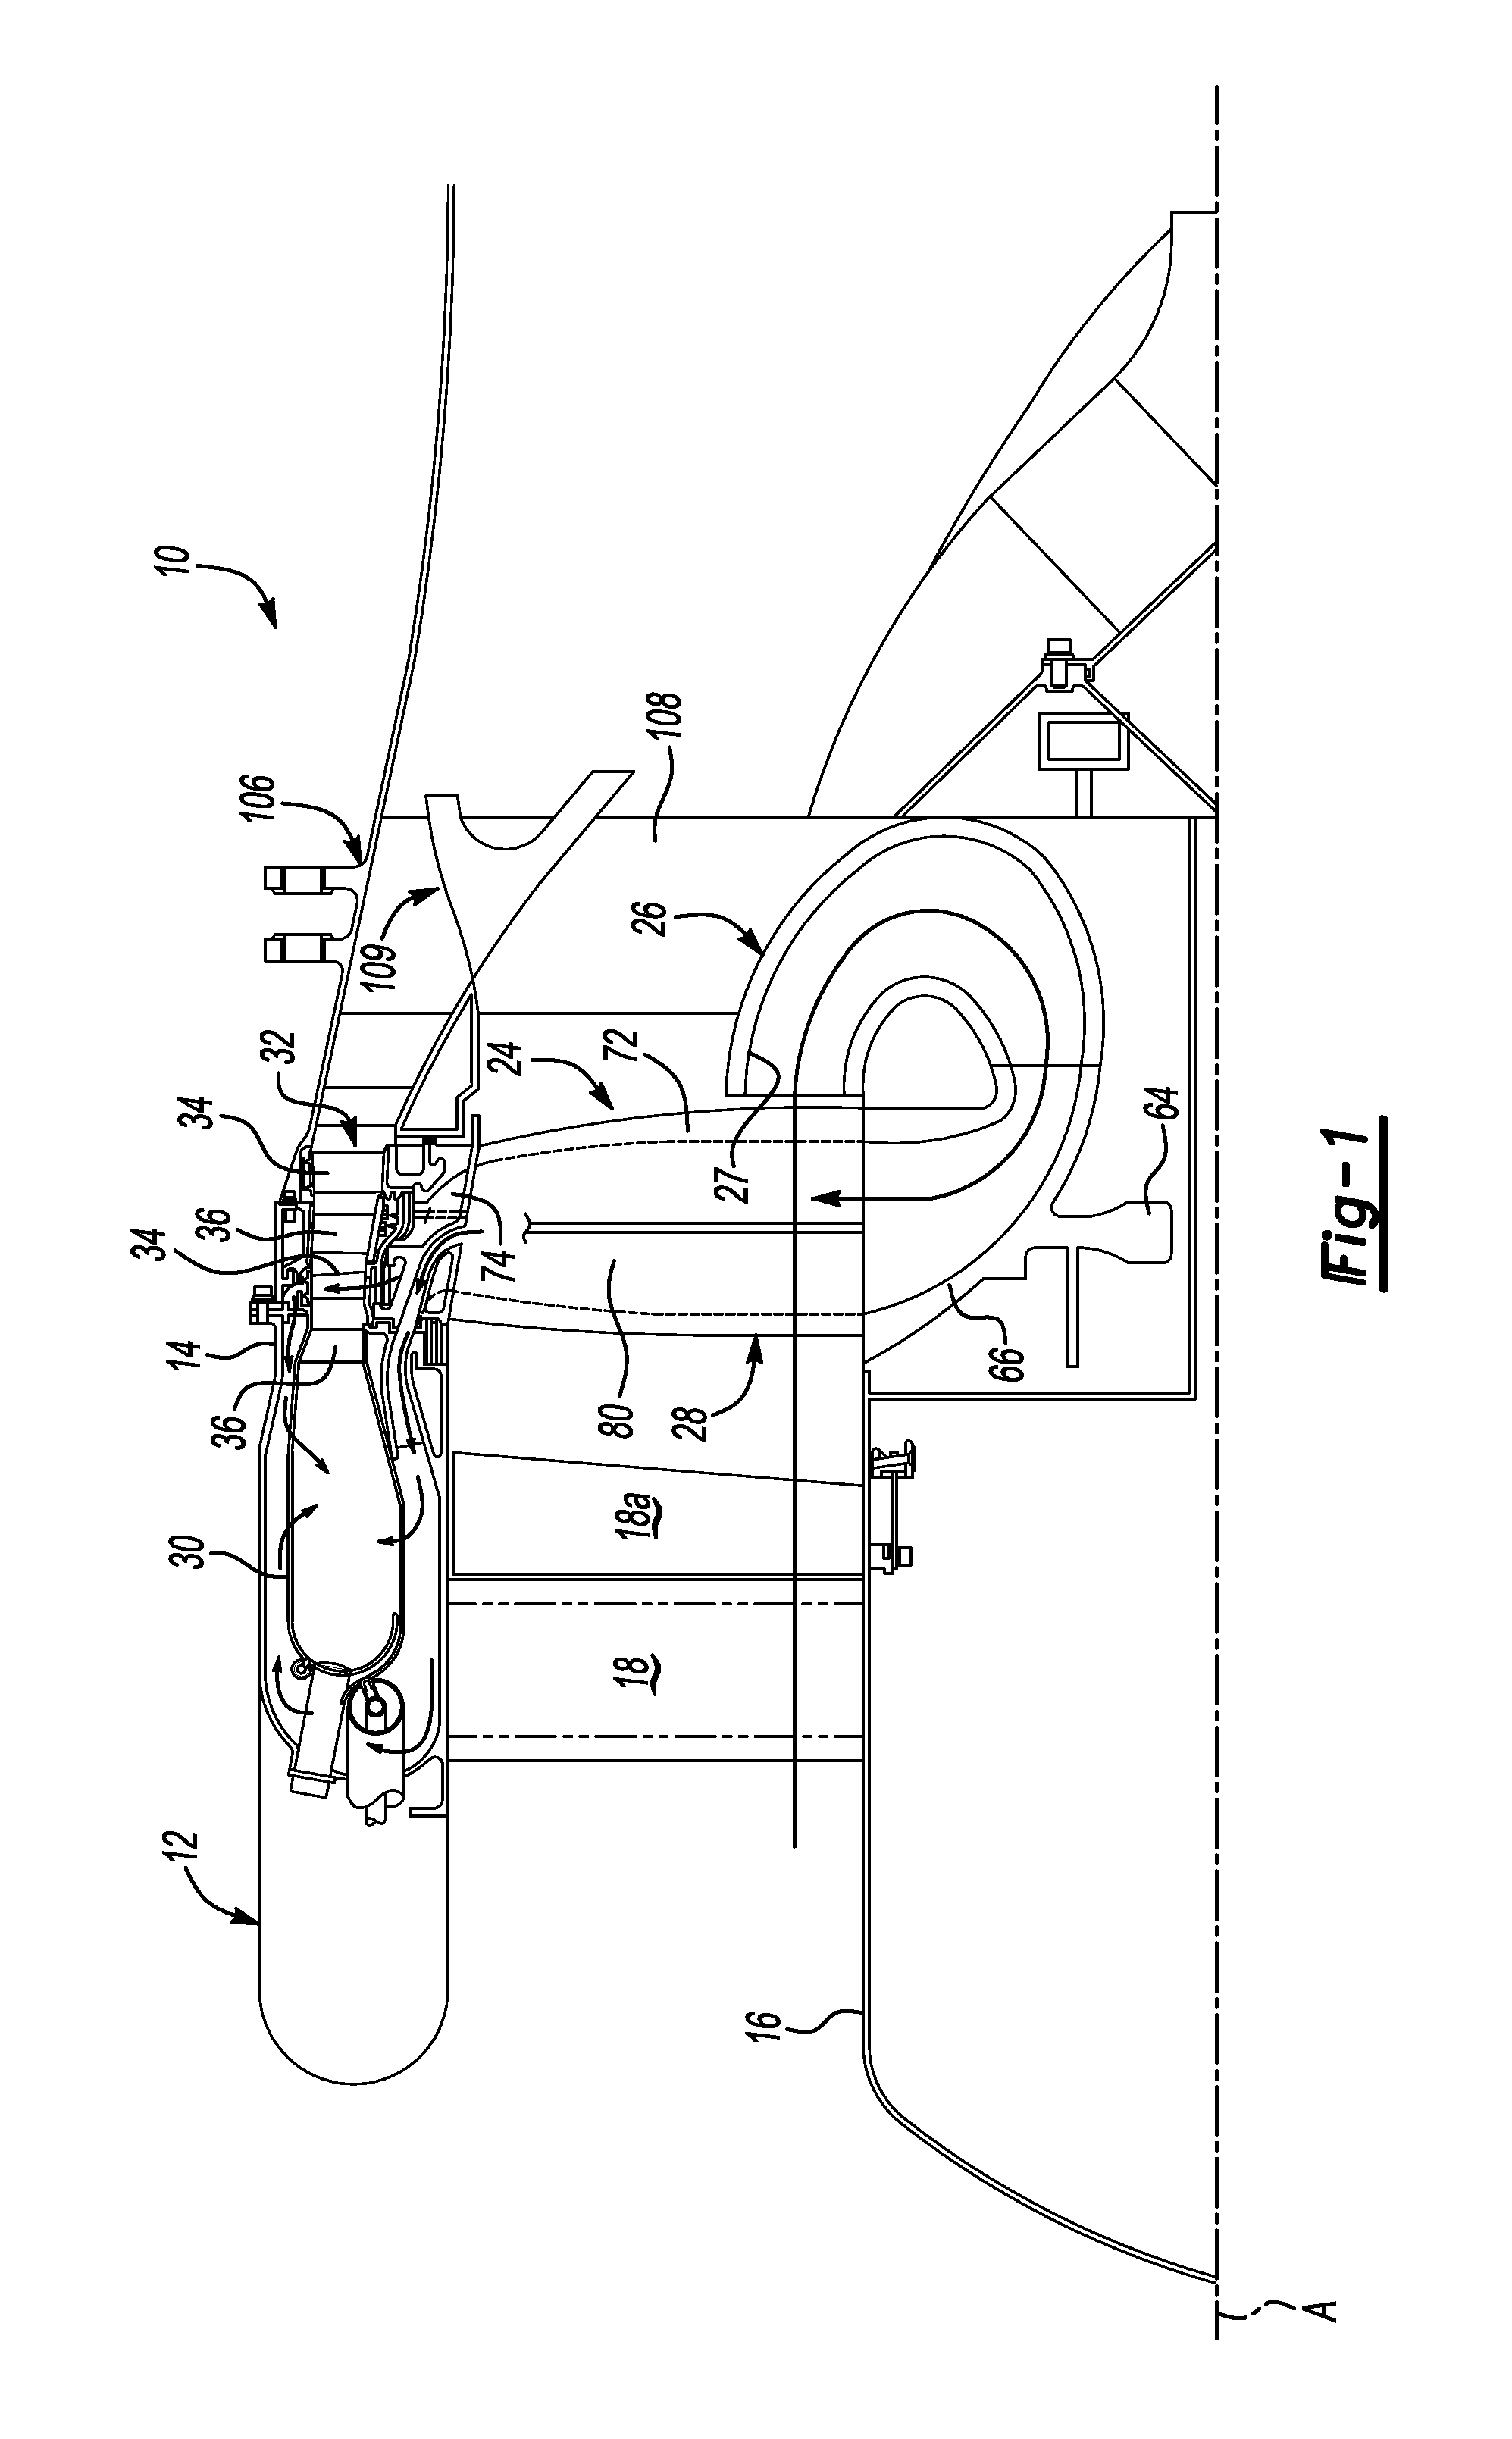 Tip turbine engine with reverse core airflow